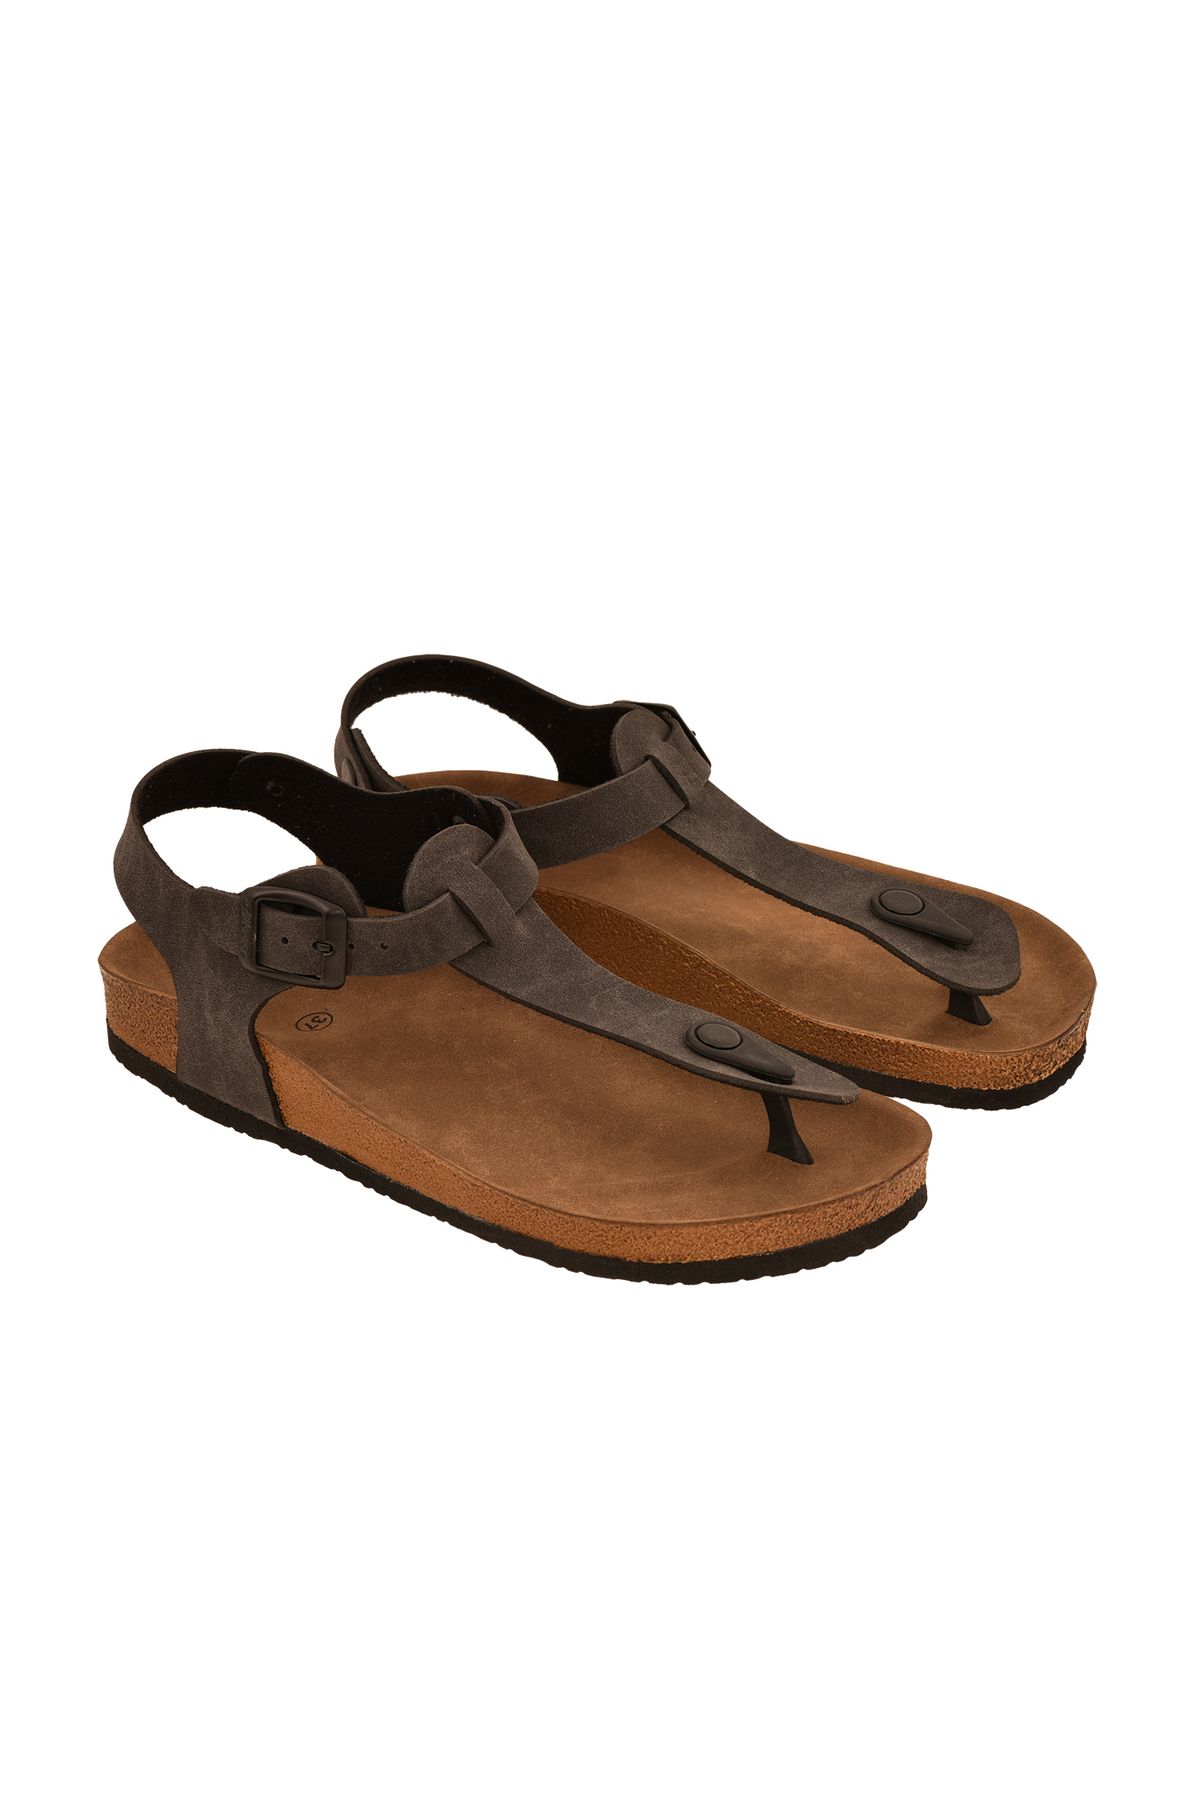 JustBow Unisex Sandalet